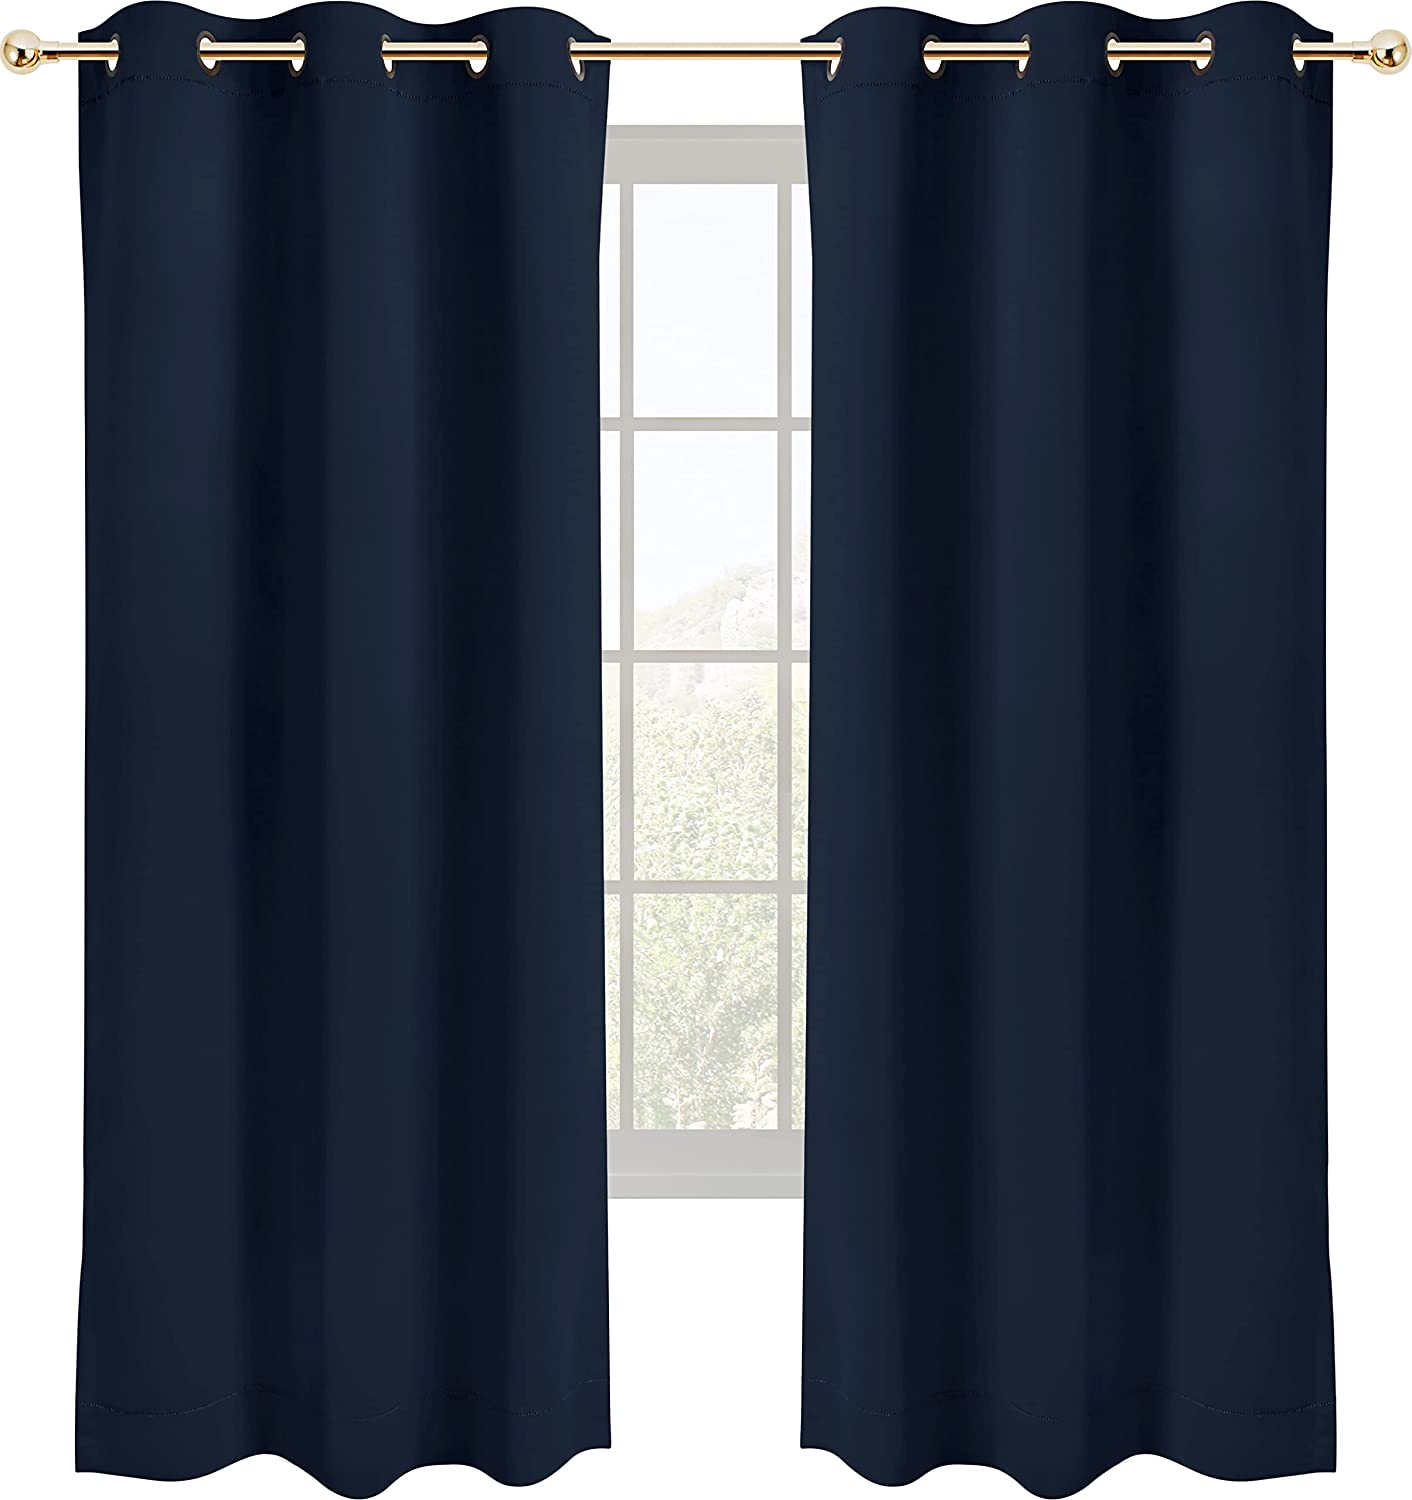 Utopia Bedding Long Lasting Blackout Thermal Curtains